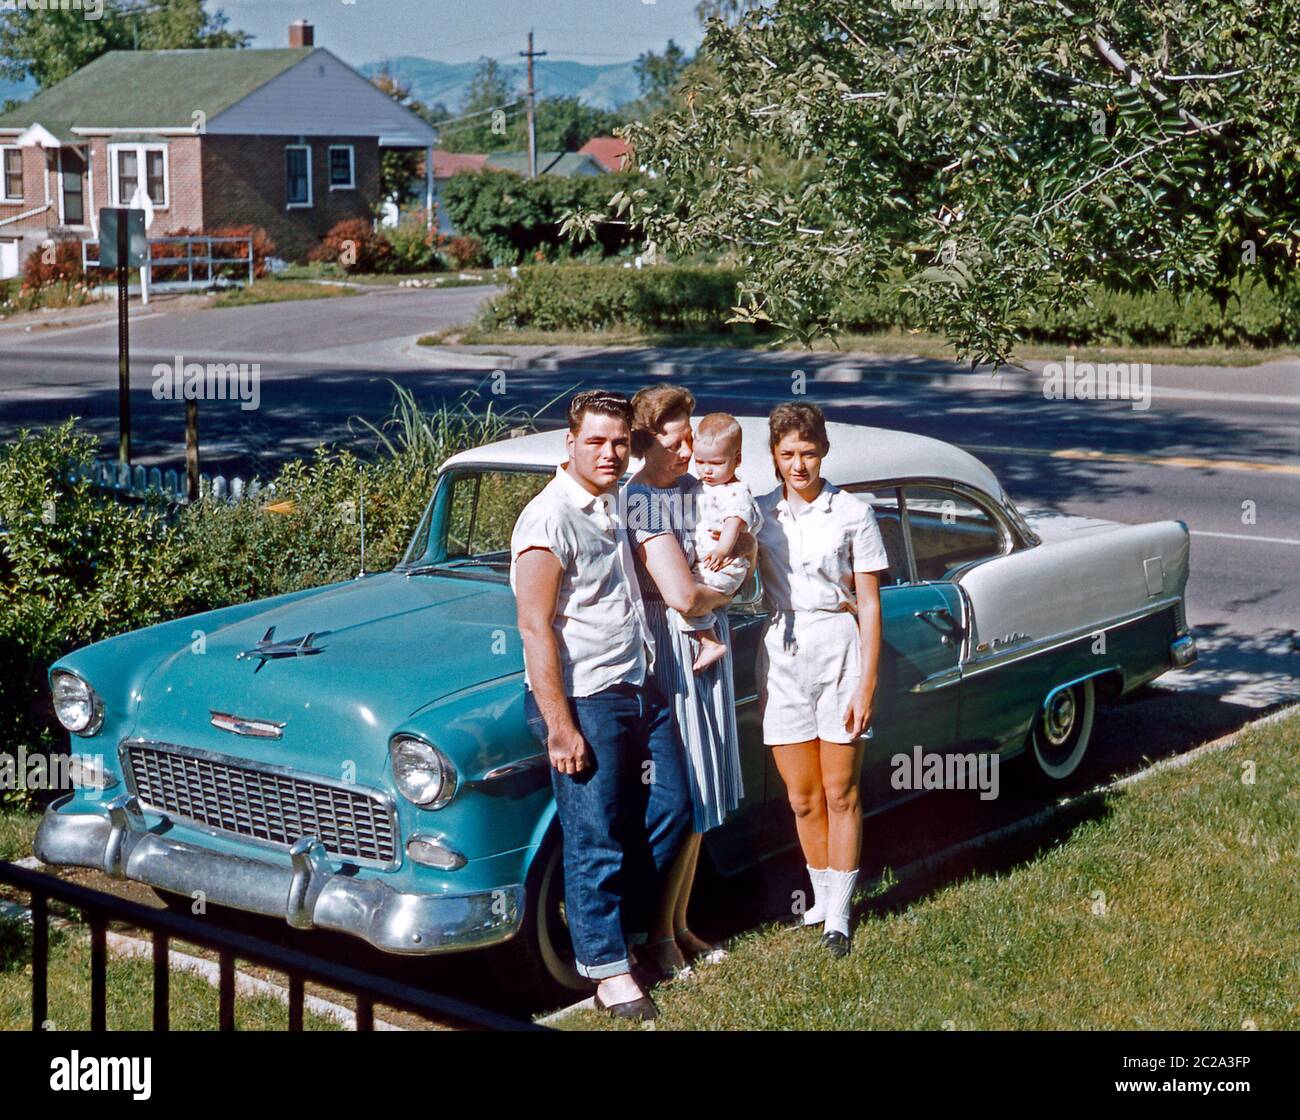 A family posing next to their two-tone Chevrolet Bel Air parked in their suburban driveway, USA, 1961. The group includes the young couple's baby. This Chevy, a 2-door hardtop, was made from 1953 to 1957. Stock Photo